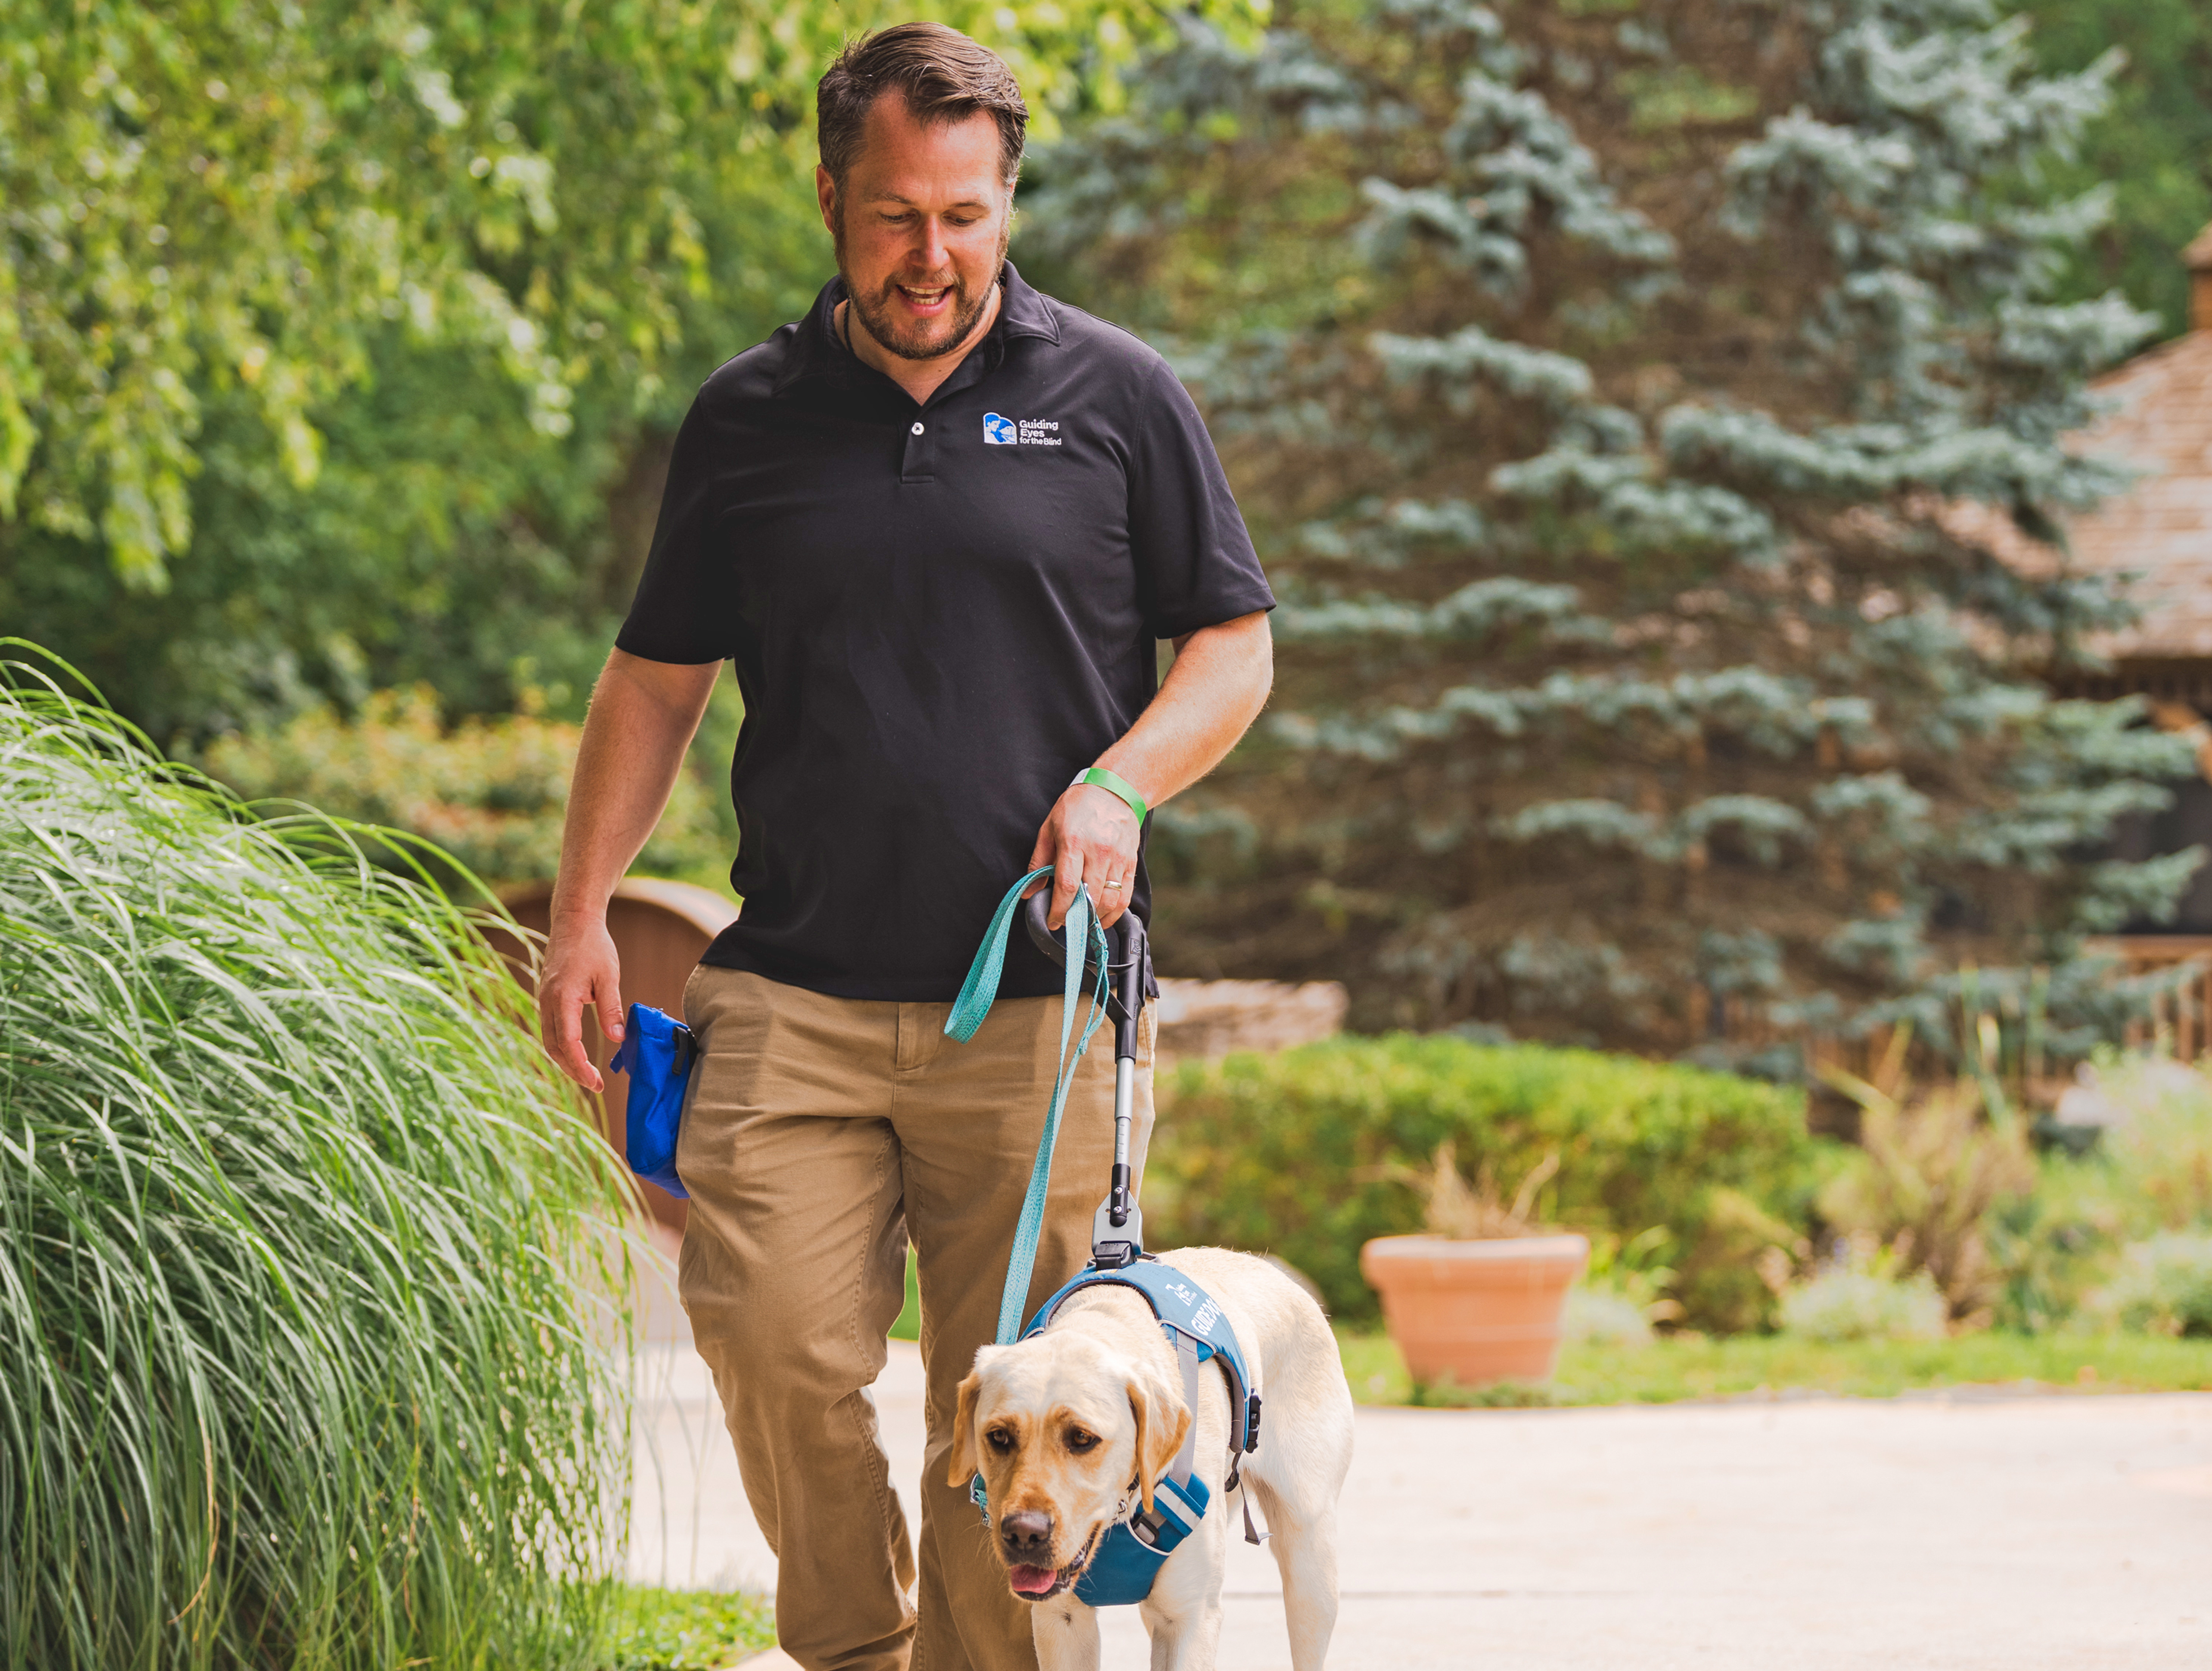  Ben Cawley ’96 walks with Becky, a two-year-old Labrador retriever, in the Guiding Eyes training program.